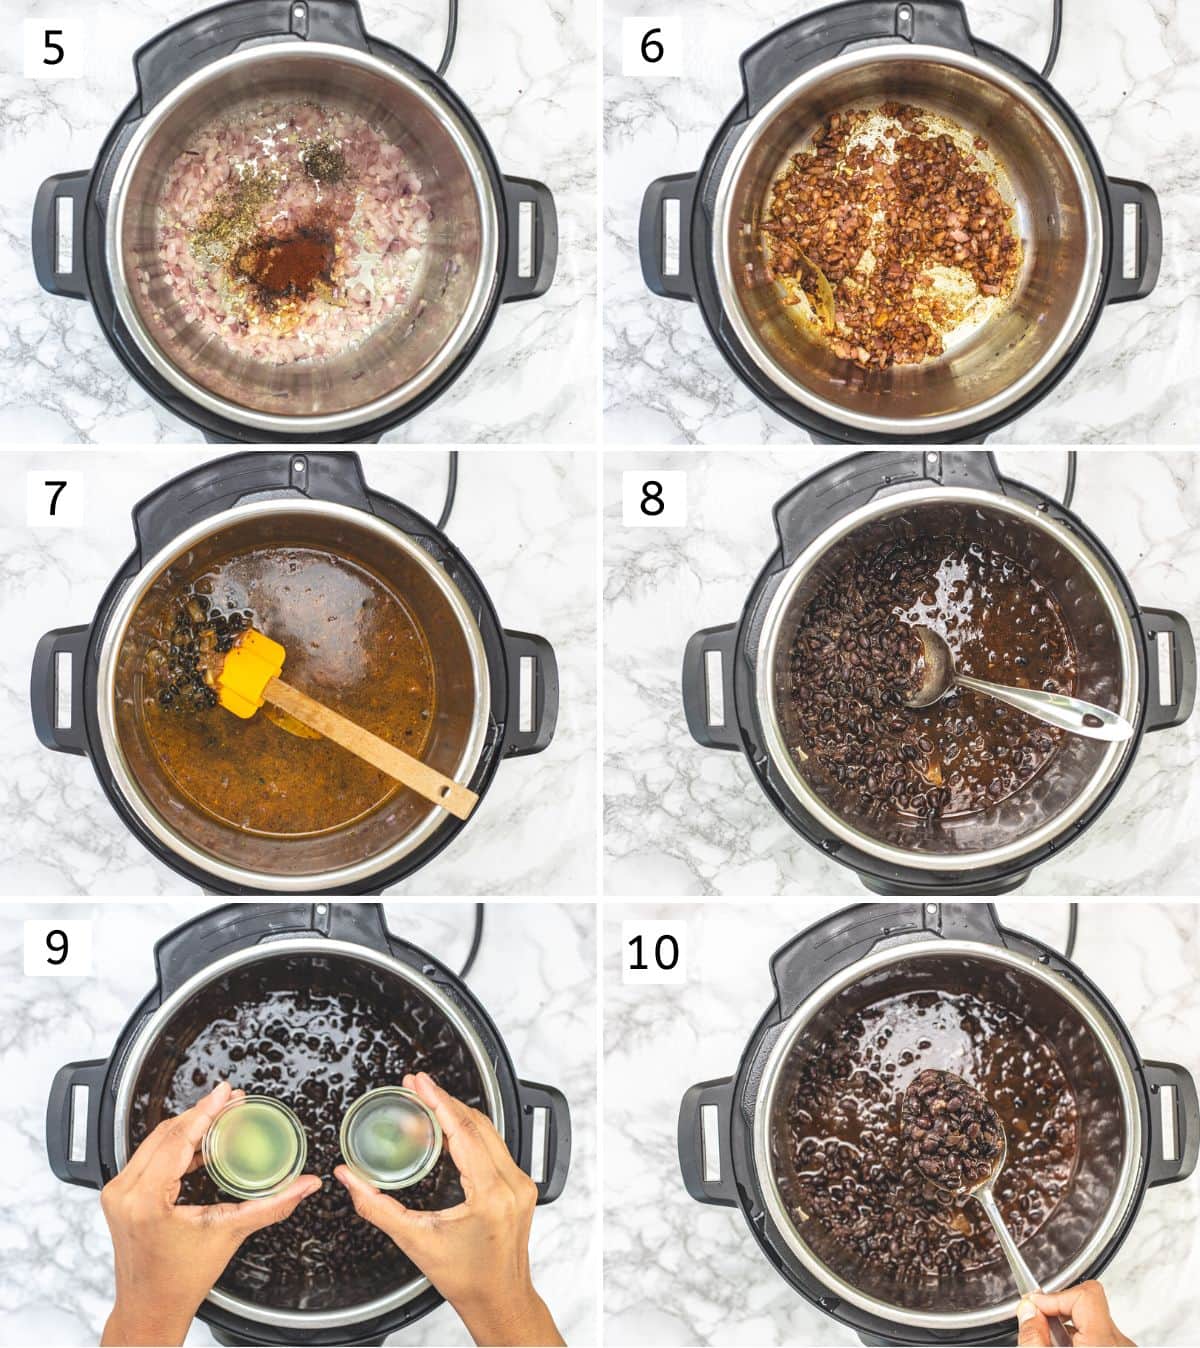 Collage of 6 images showing adding spices, beans, water and cooked beans.